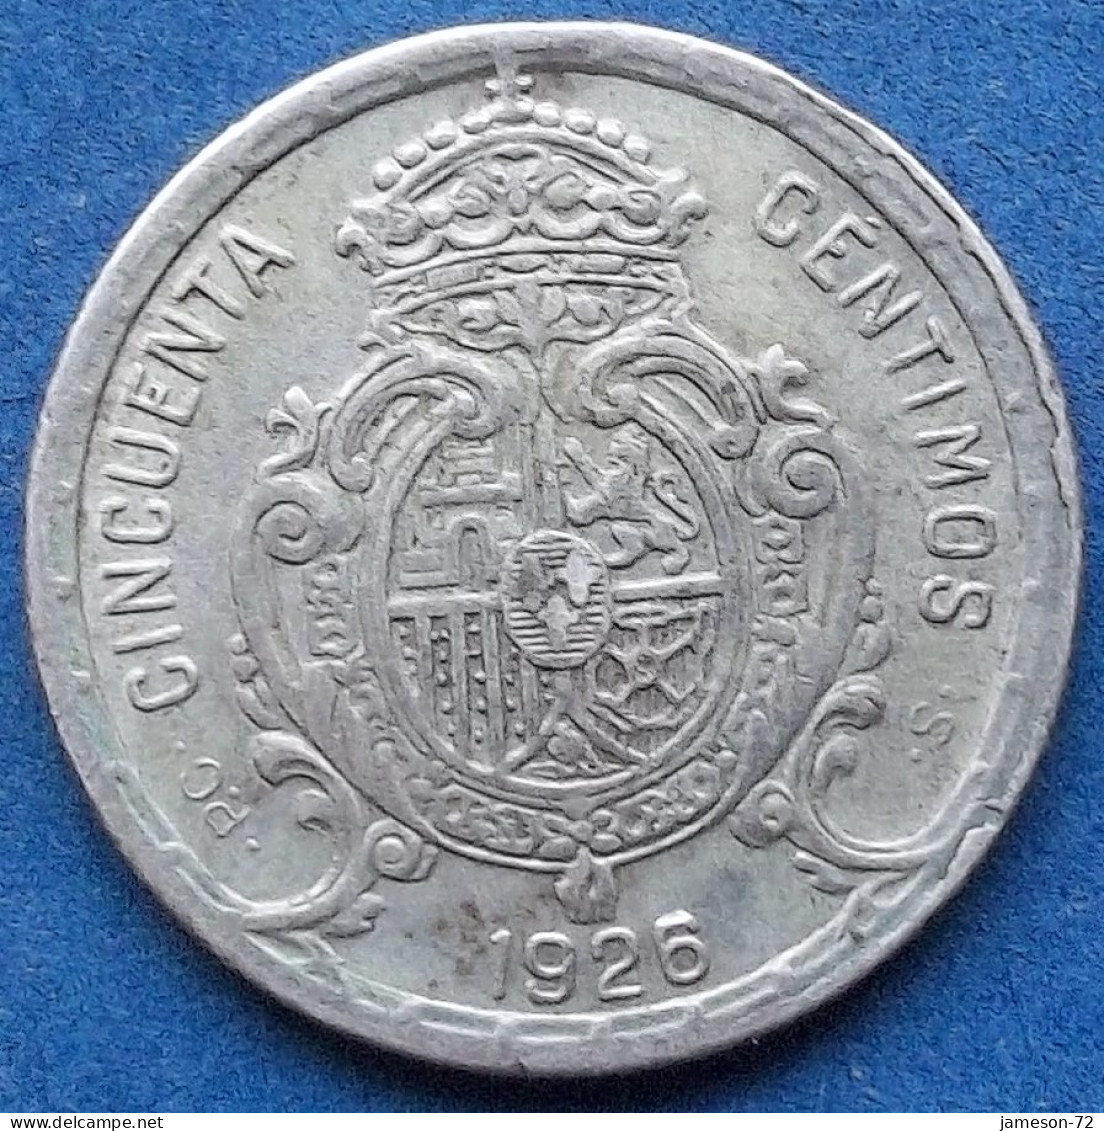 SPAIN - Silver 50 Centimos 1926 PC S KM# 741 Alfonso XIII (1886-1931) - Edelweiss Coins - Primeras Acuñaciones